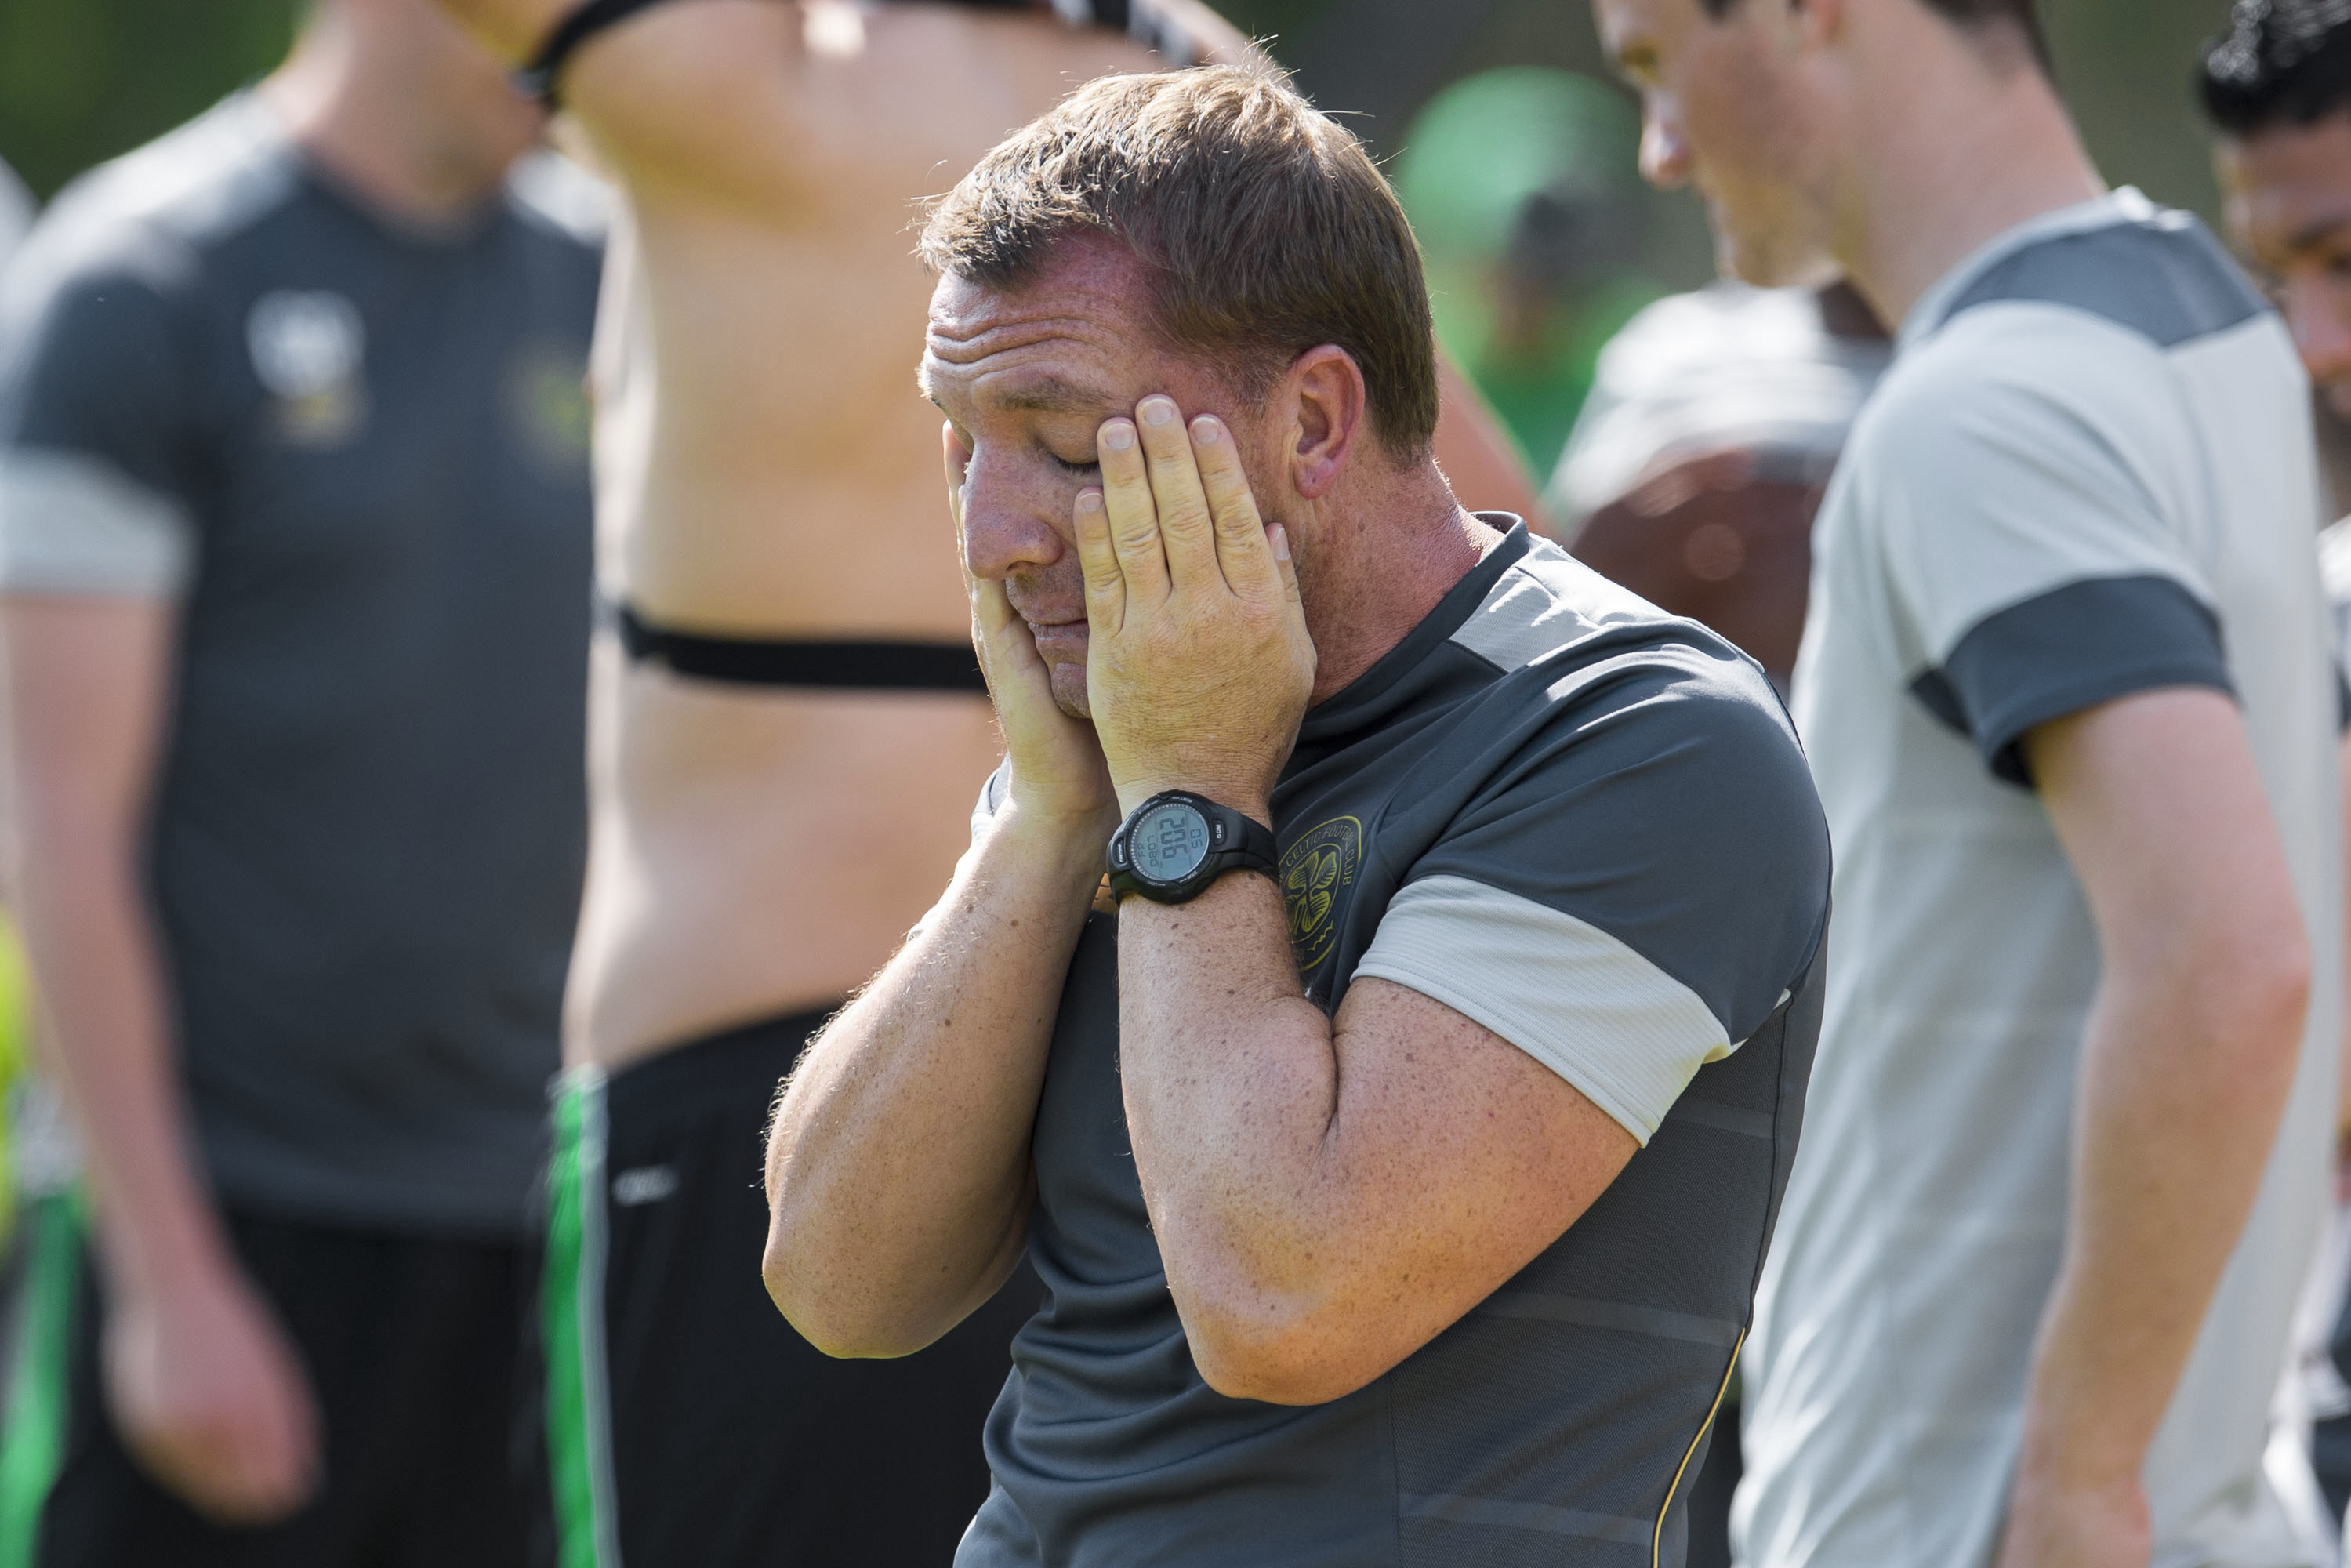 Celtic manager Brendan Rodgers (SNS Group)